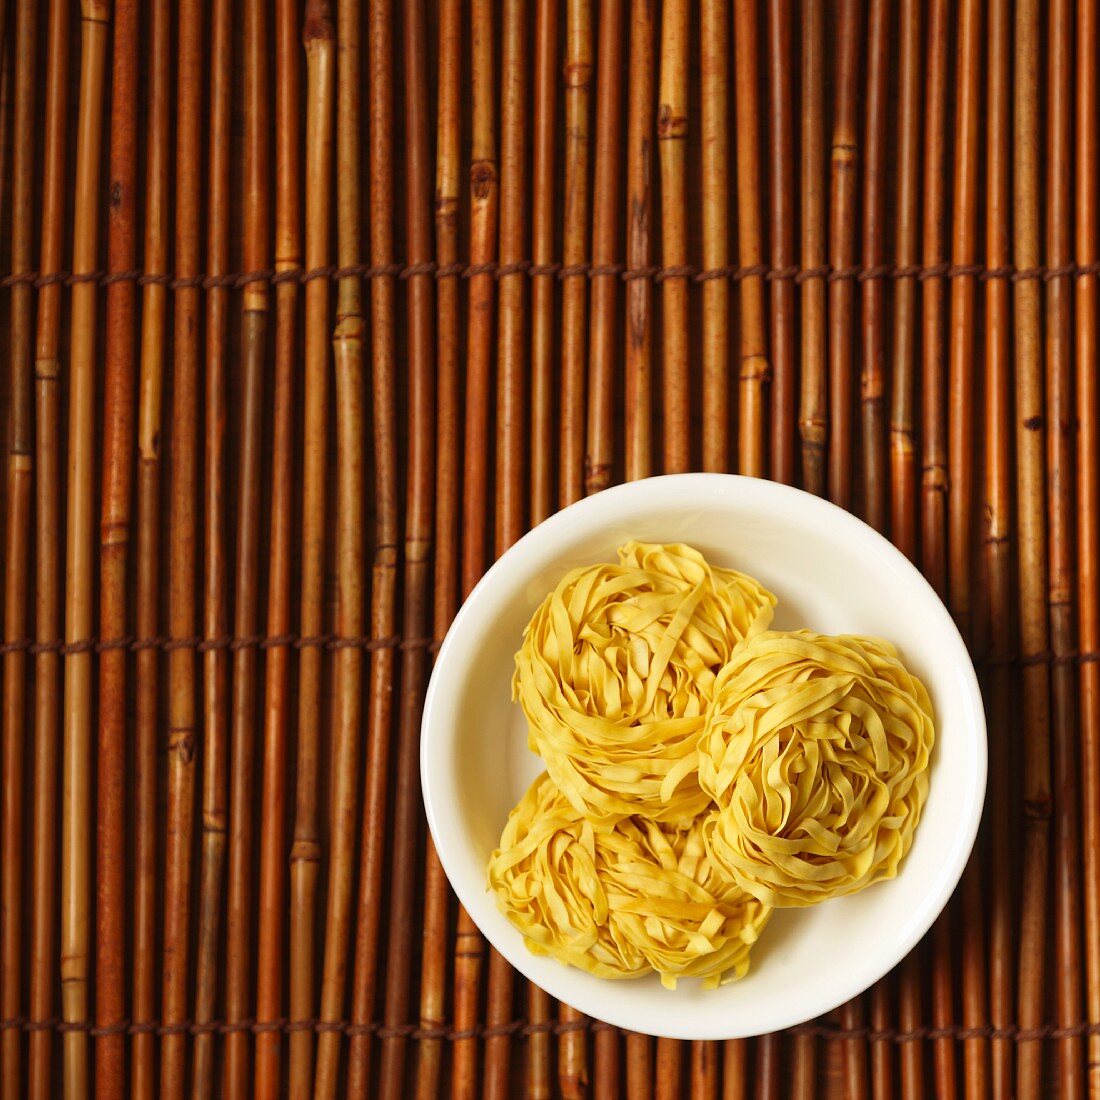 Chinese egg noodles in a dish on a bamboo mat